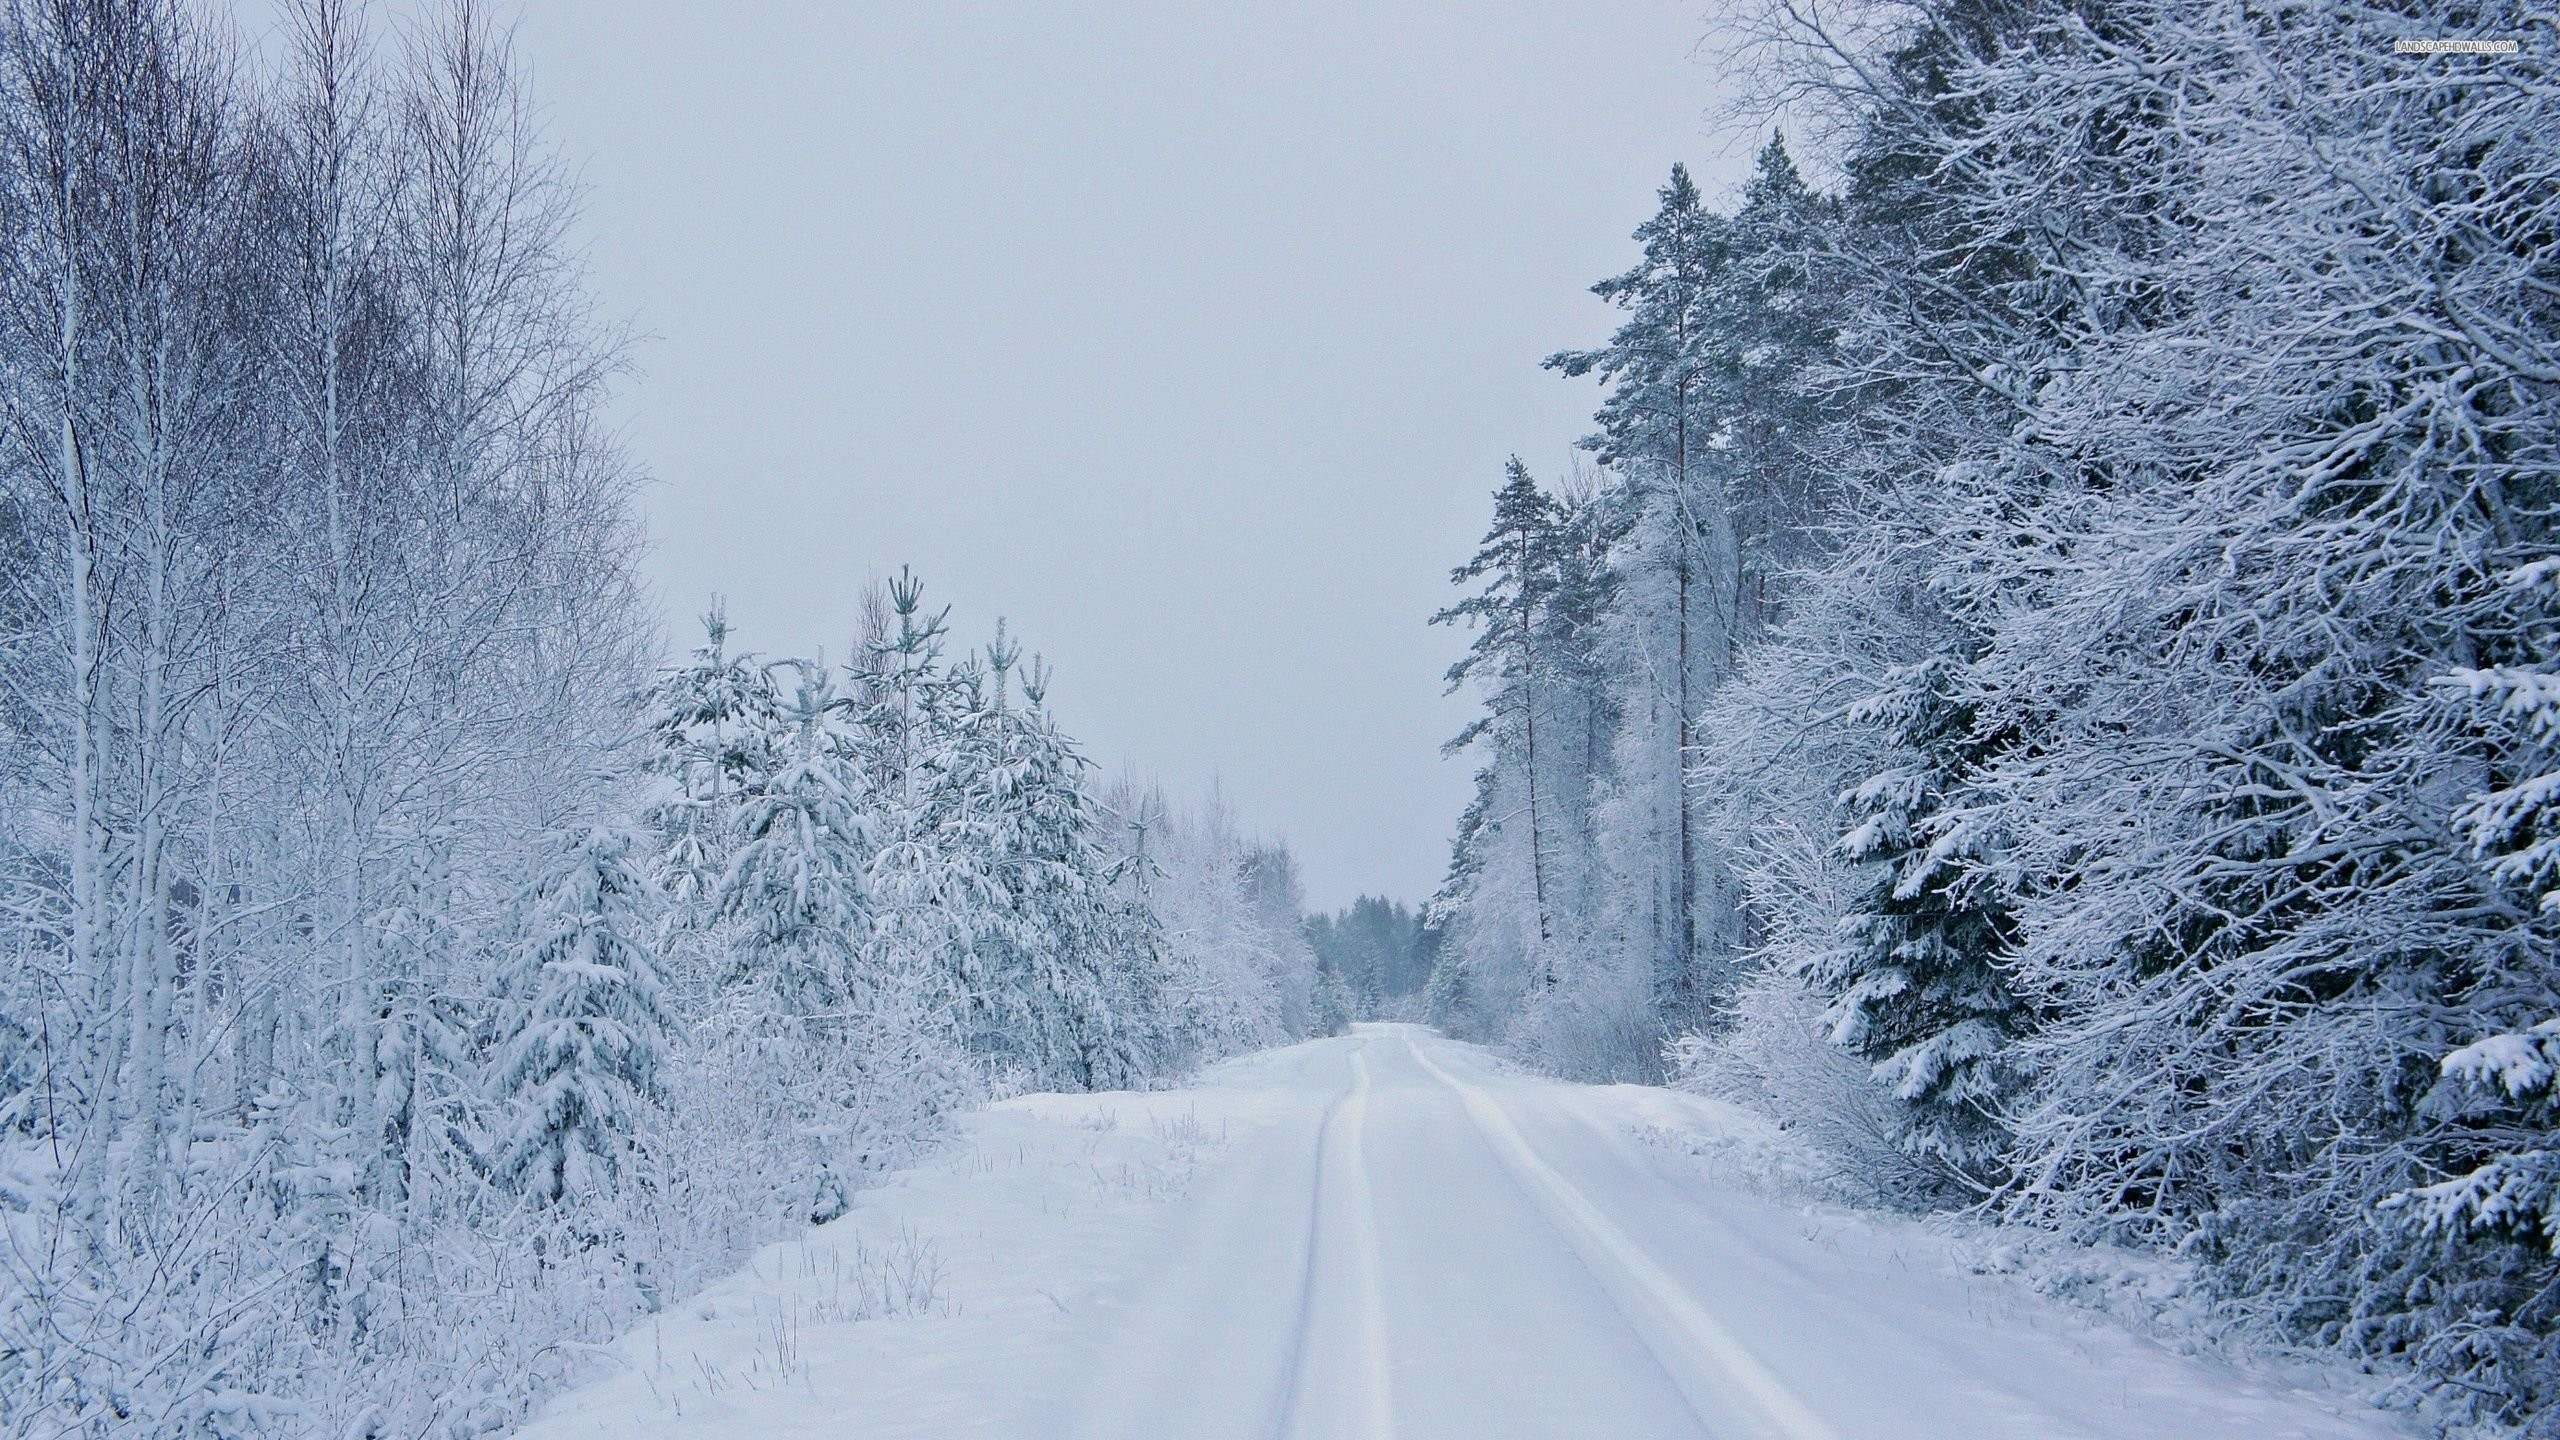 2560x1440 Snowy Road Wallpaper Winter Nature (77 Wallpapers)